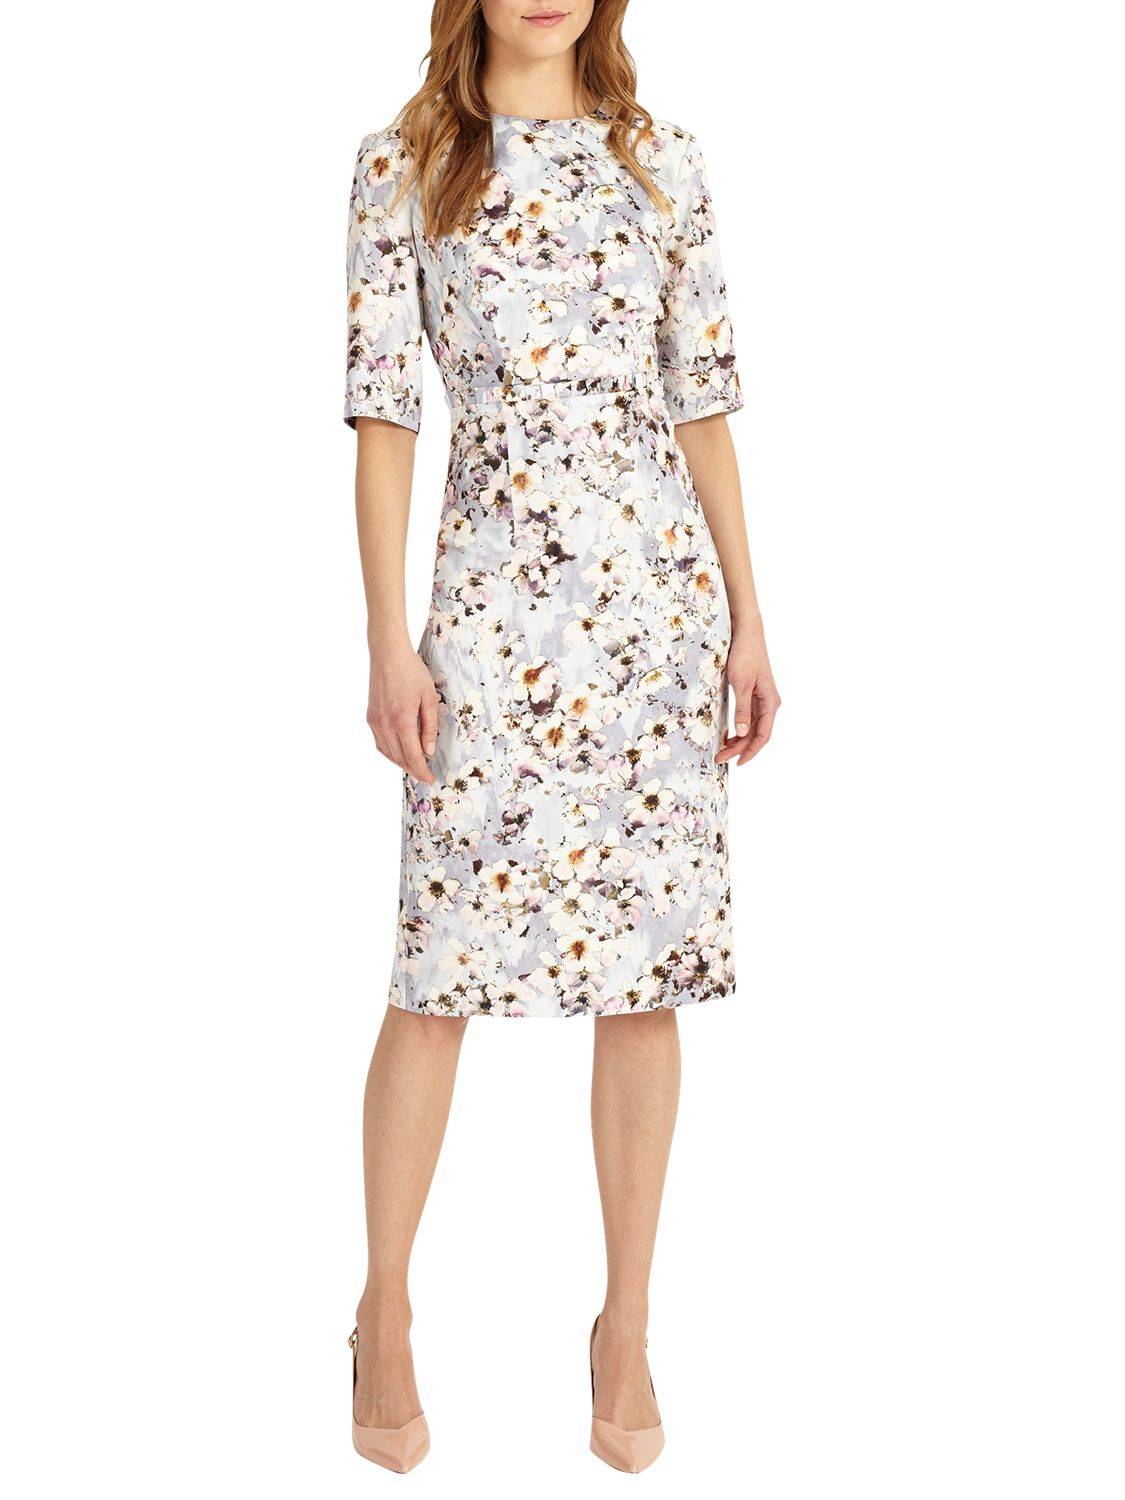 Phase Eight Ember Floral Print Dress, Mineral, 8